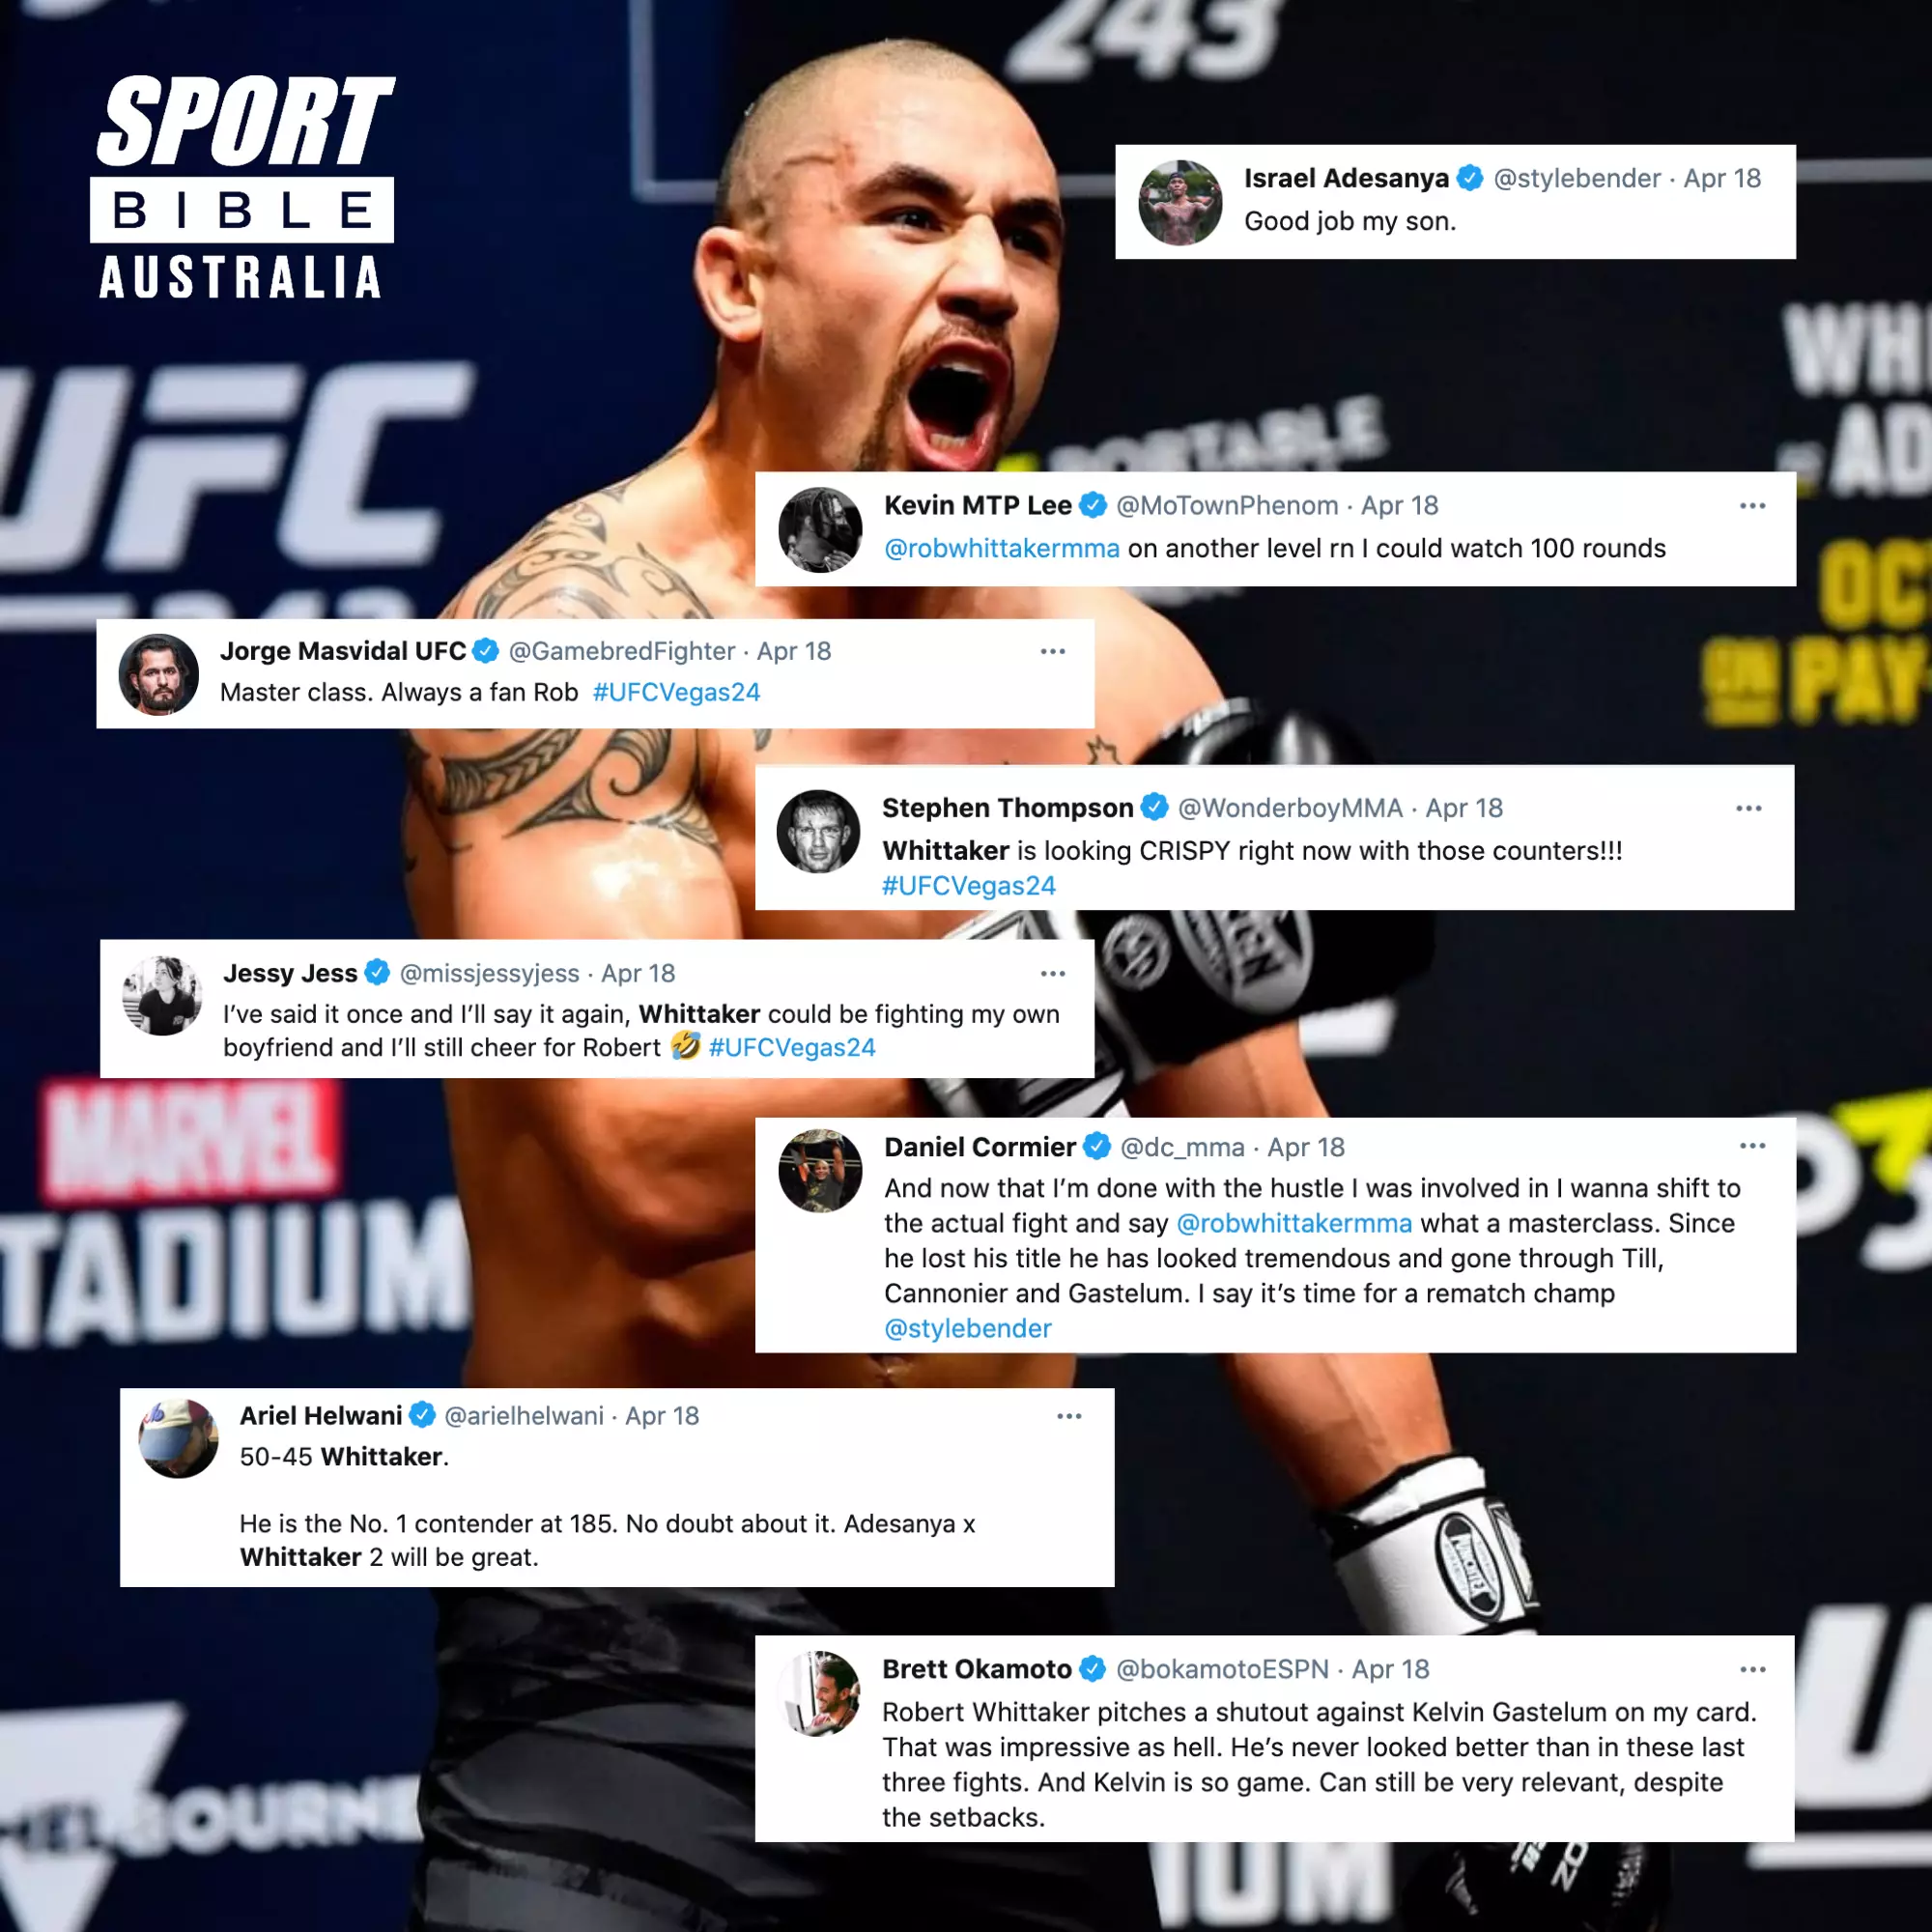 Whittaker impressed A LOT of people with his performance against Gastelum.